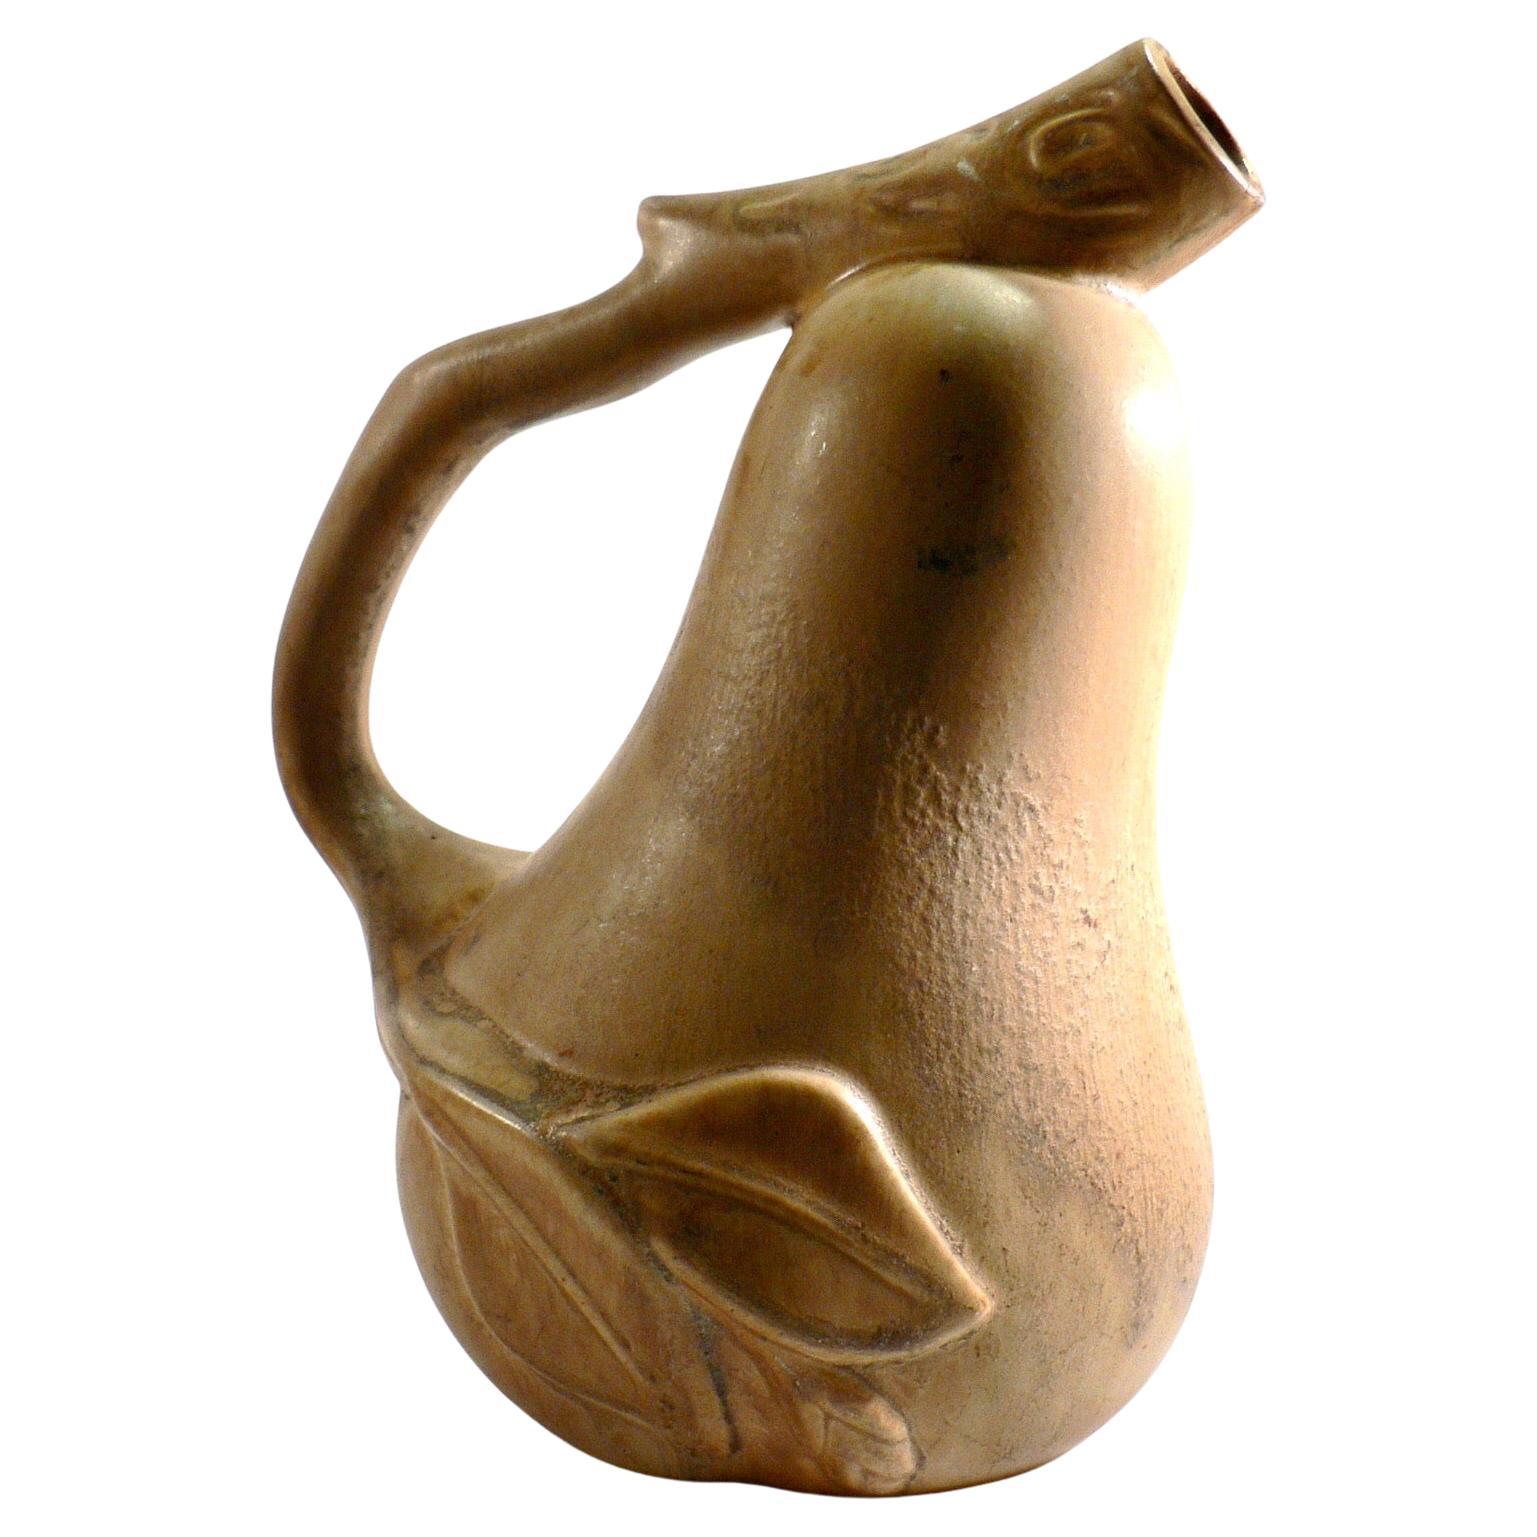 An Art Deco water pitcher in pear-shaped stoneware France mid-20th century